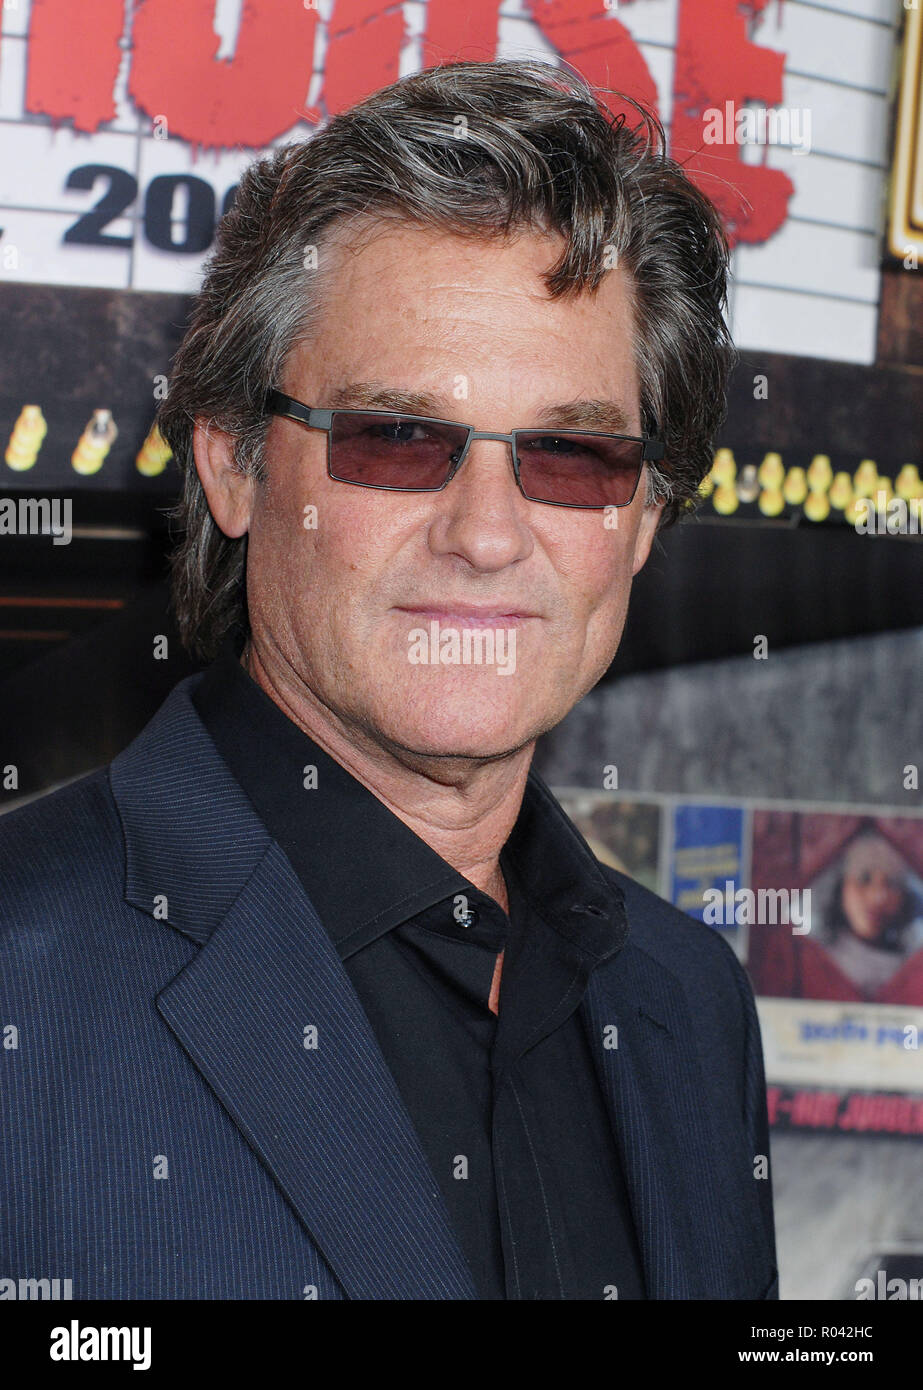 Kurt Russell  arriving at the Grindhouse Premiere at the Orpheum Theatre In Los Angeles.  headshot eye contact  RussellKurt014 Red Carpet Event, Vertical, USA, Film Industry, Celebrities,  Photography, Bestof, Arts Culture and Entertainment, Topix Celebrities fashion /  Vertical, Best of, Event in Hollywood Life - California,  Red Carpet and backstage, USA, Film Industry, Celebrities,  movie celebrities, TV celebrities, Music celebrities, Photography, Bestof, Arts Culture and Entertainment,  Topix, headshot, vertical, one person,, from the year , 2007, inquiry tsuni@Gamma-USA.com Stock Photo